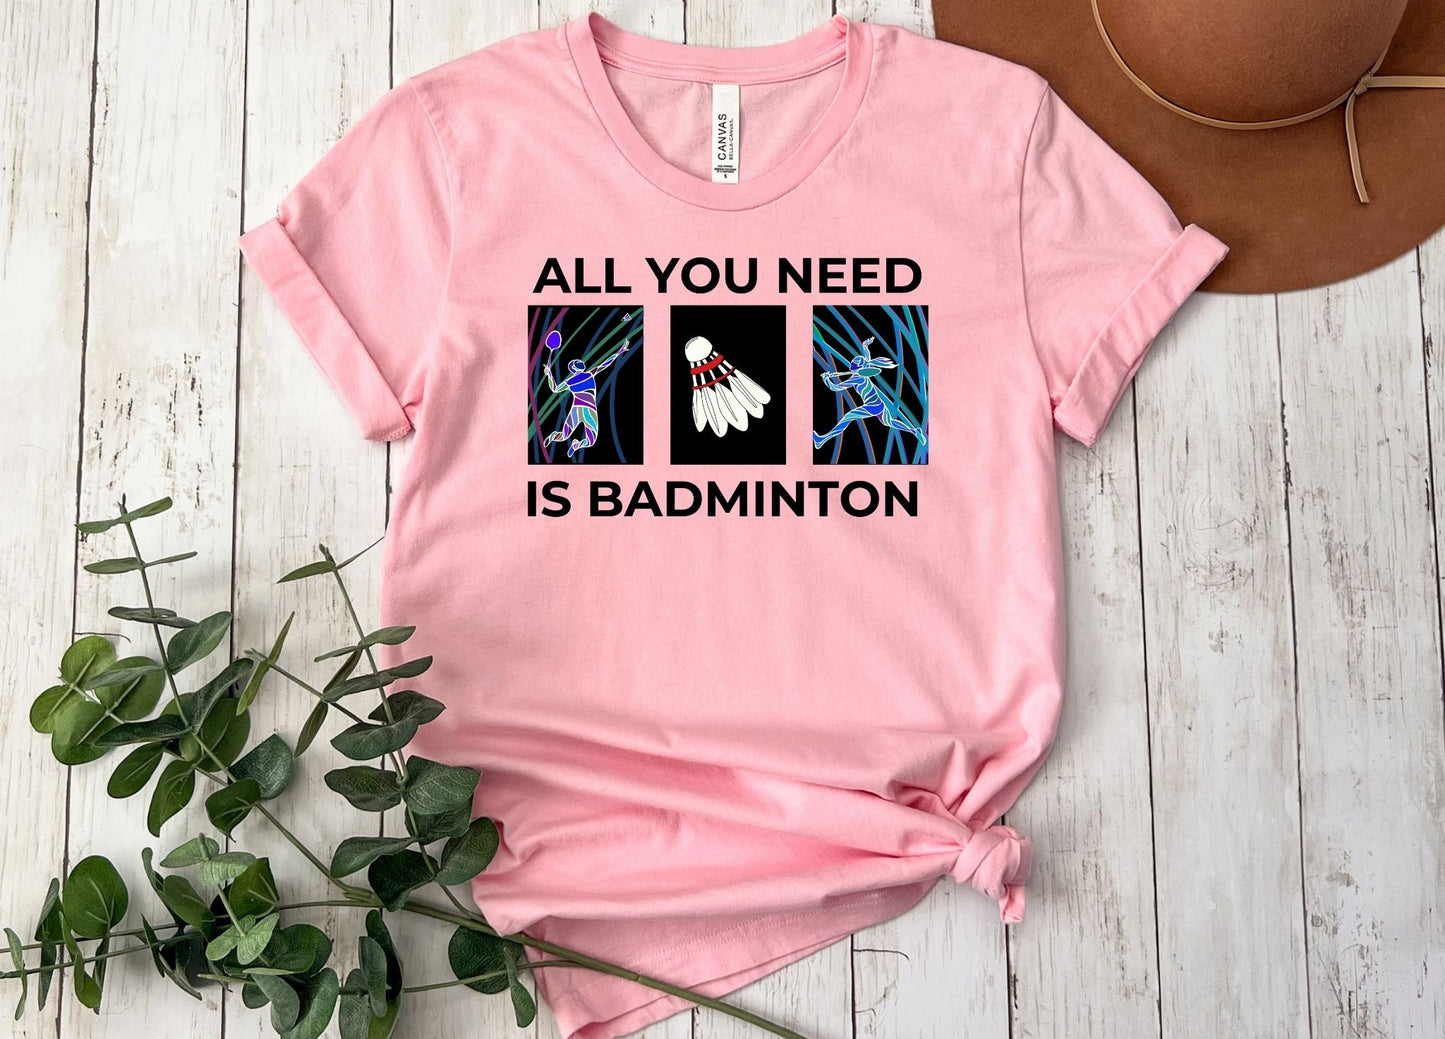 All you Need is Badminton Unisex T-shirt!